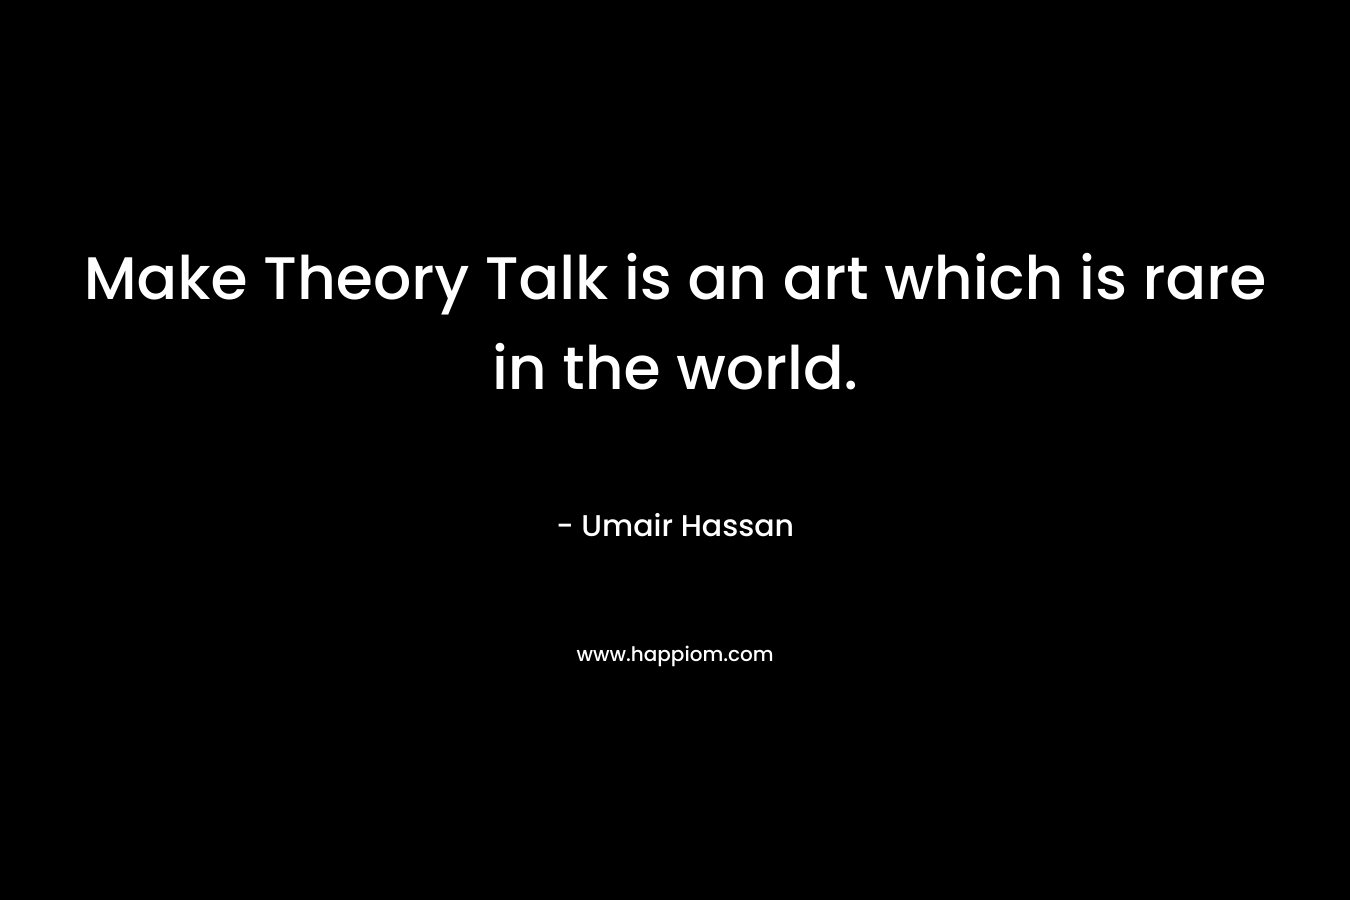 Make Theory Talk is an art which is rare in the world.